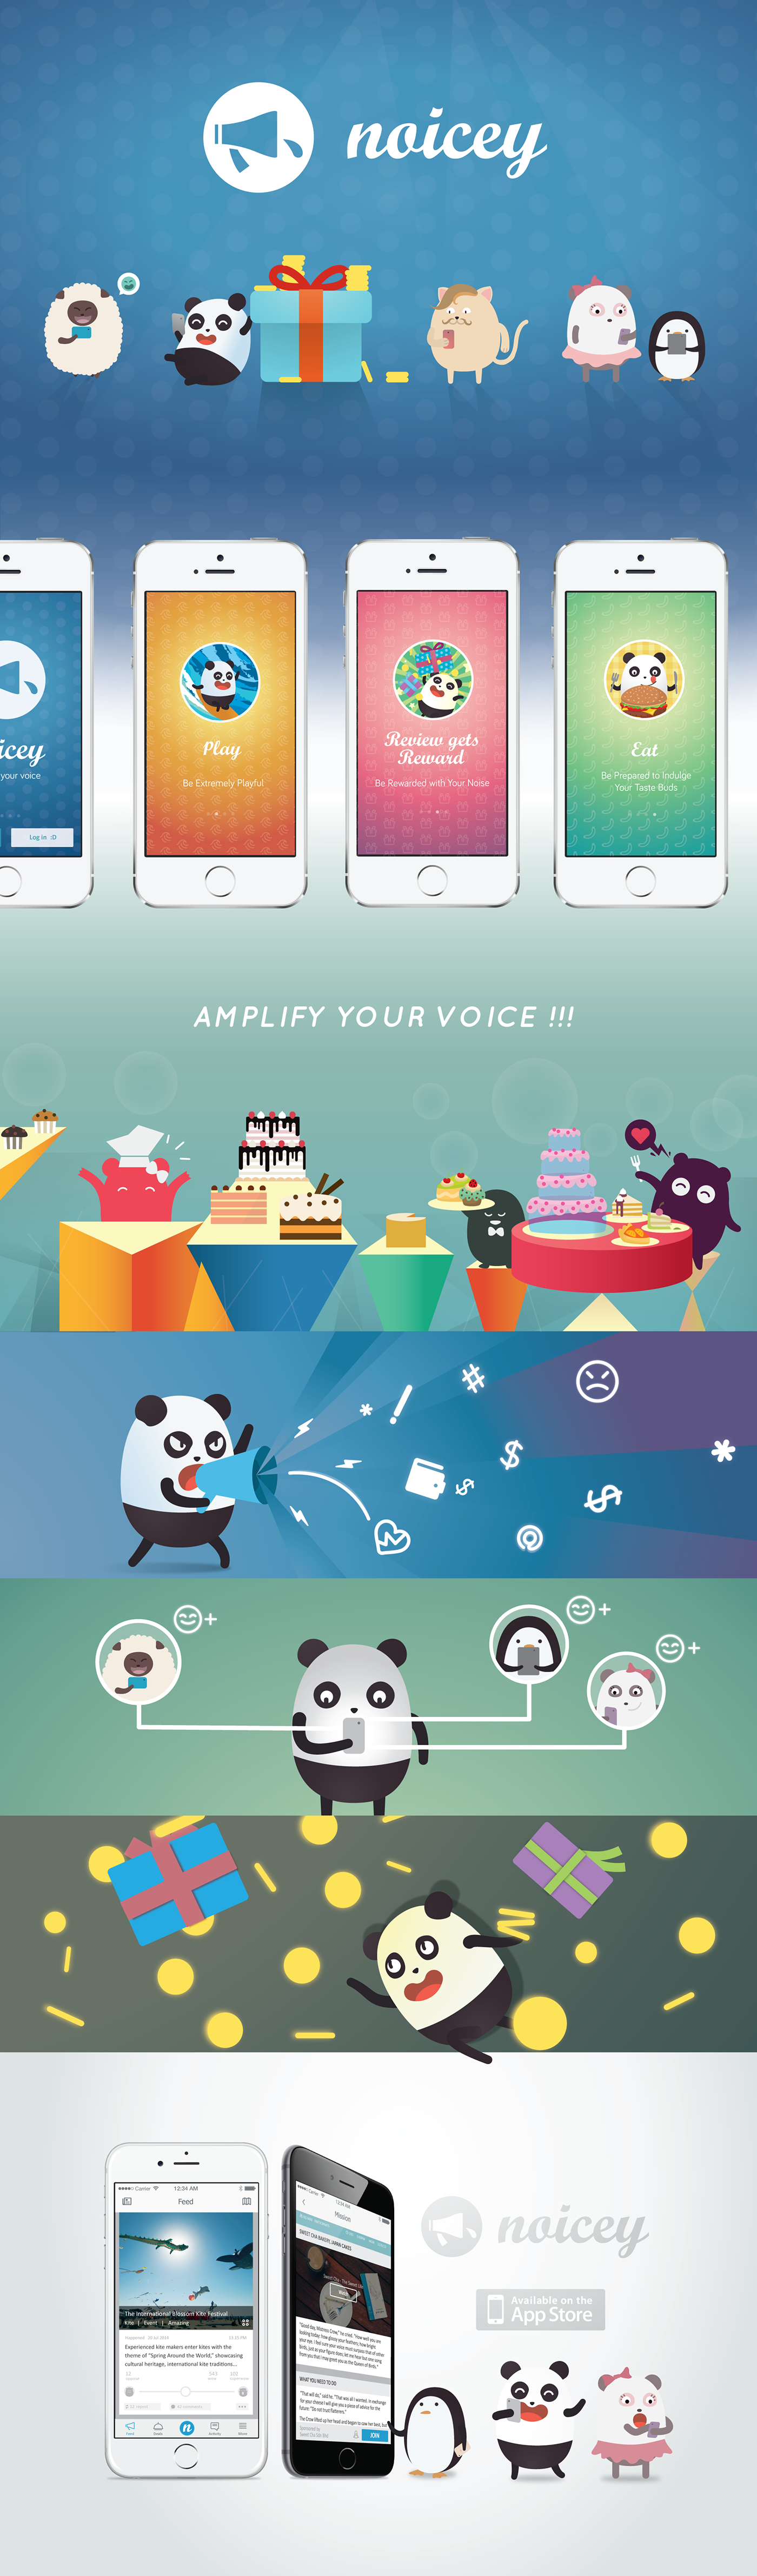 brand identity noicey app UIX user interface user experience Character design  Character Panda  Fun